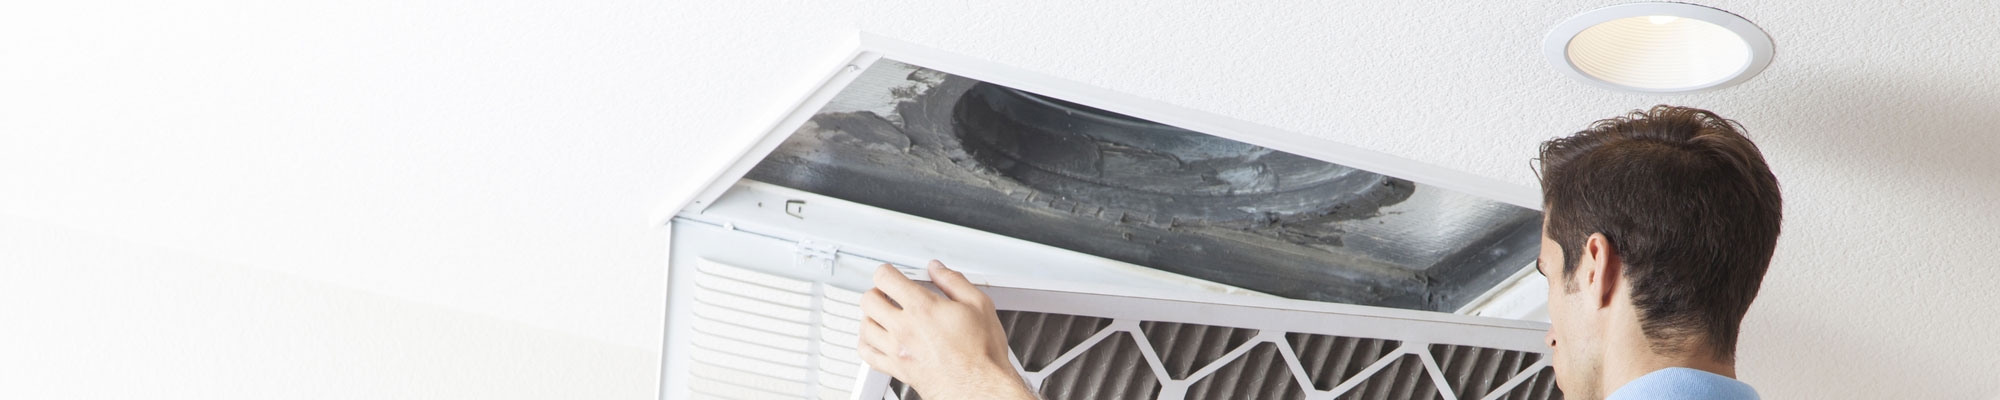 SteamKing Carpet & Air Duct Cleaning | Call Today, Clean Today!